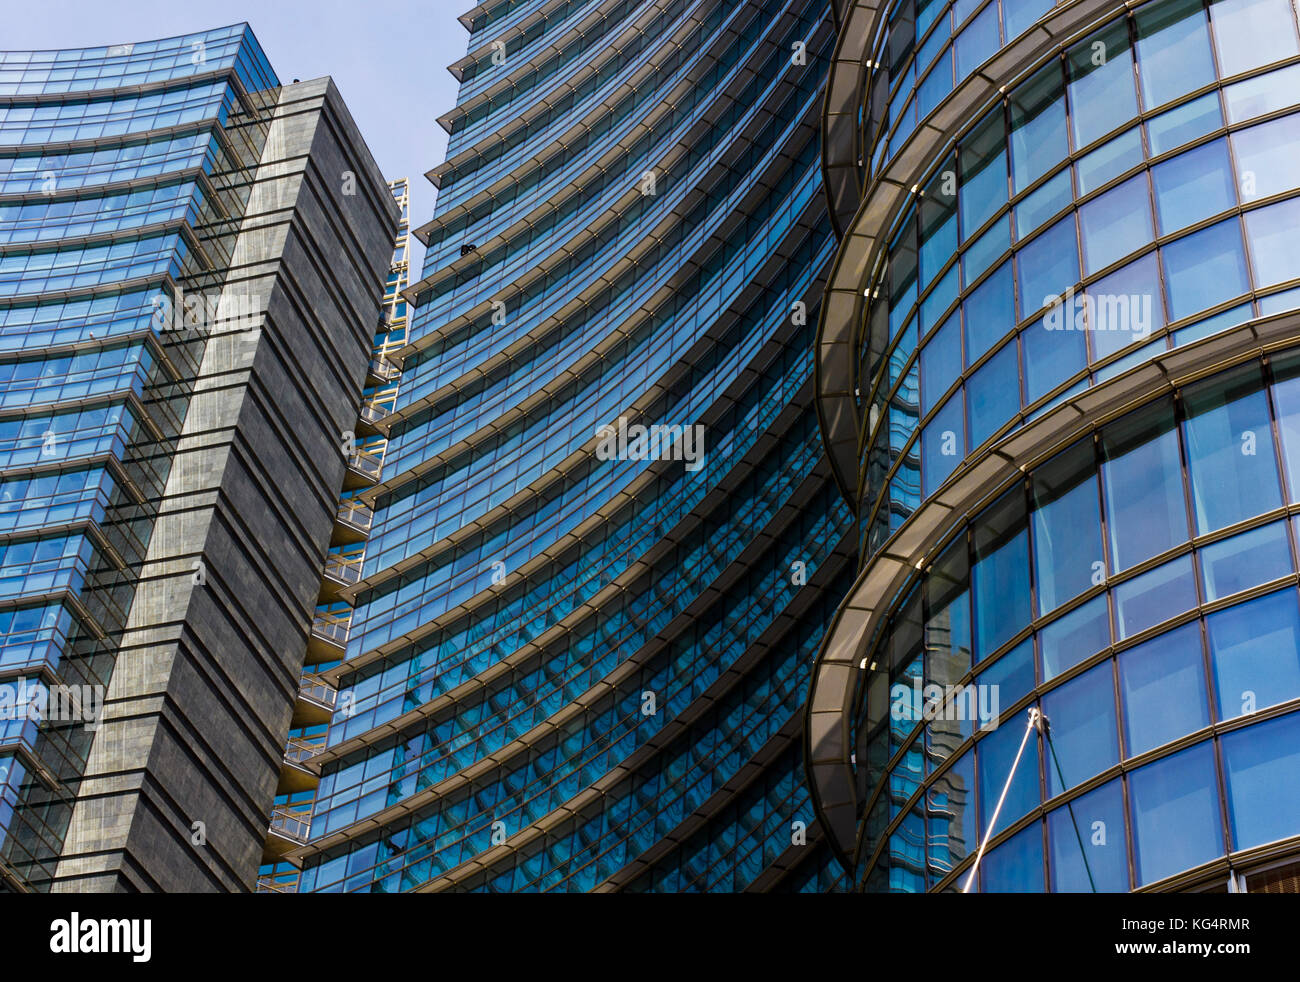 MILAN, ITALY - MAY 10 2014: Architectural detail of the glass facade on the Unicredit tower building in Milan, the tallest skyscraper in Italy Stock Photo